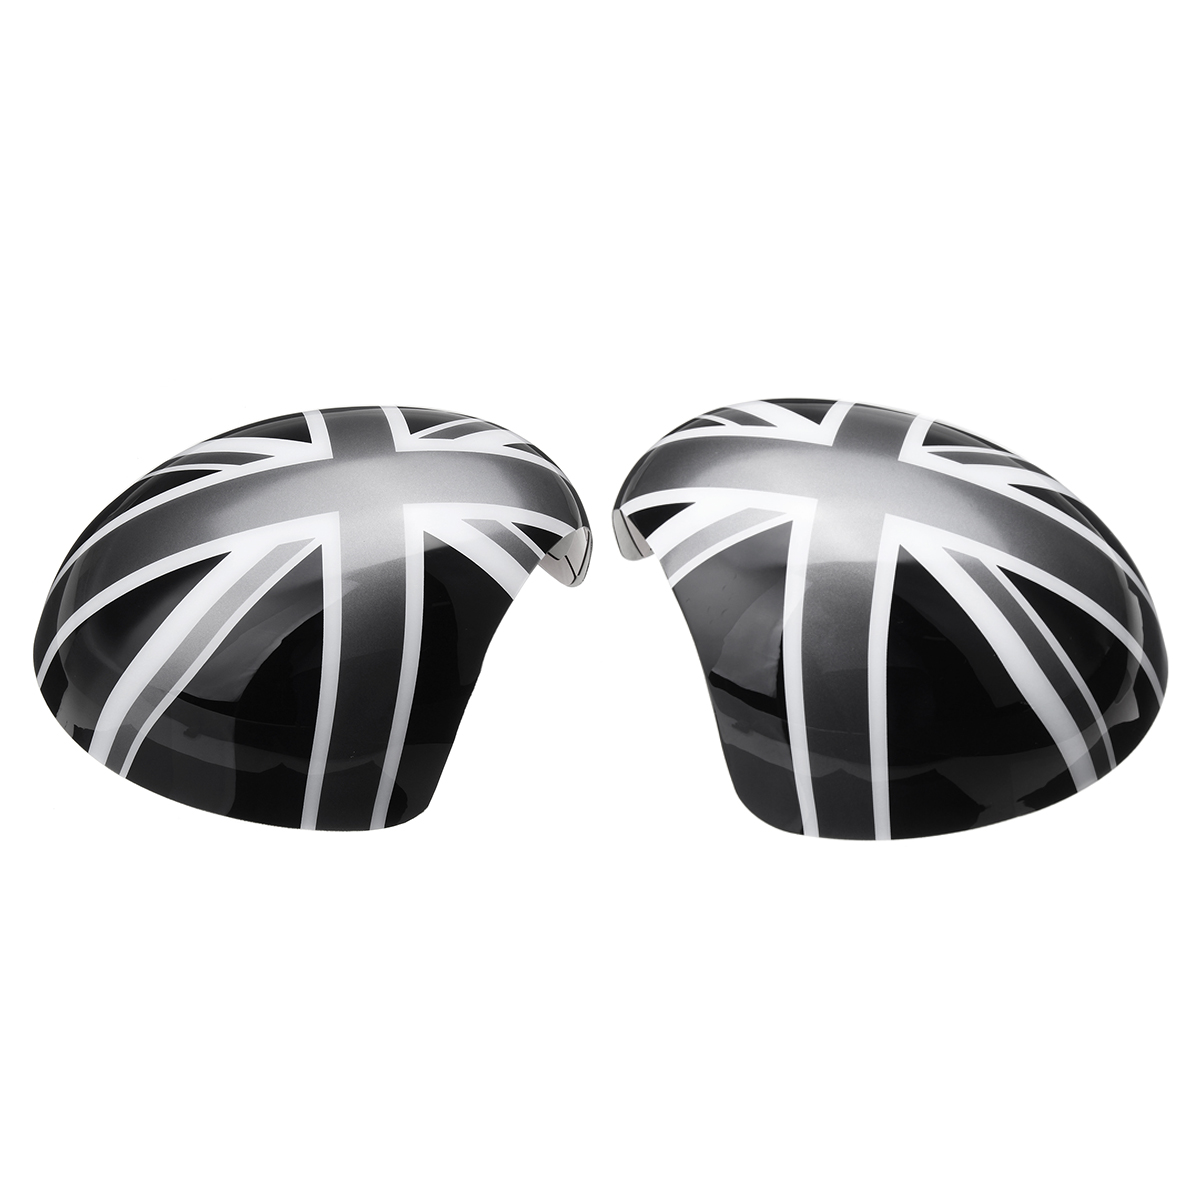 

Union Jack Car Wing Mirror Cover Pair for MINI Cooper R55 R56 R57 R60 Power Fold Model